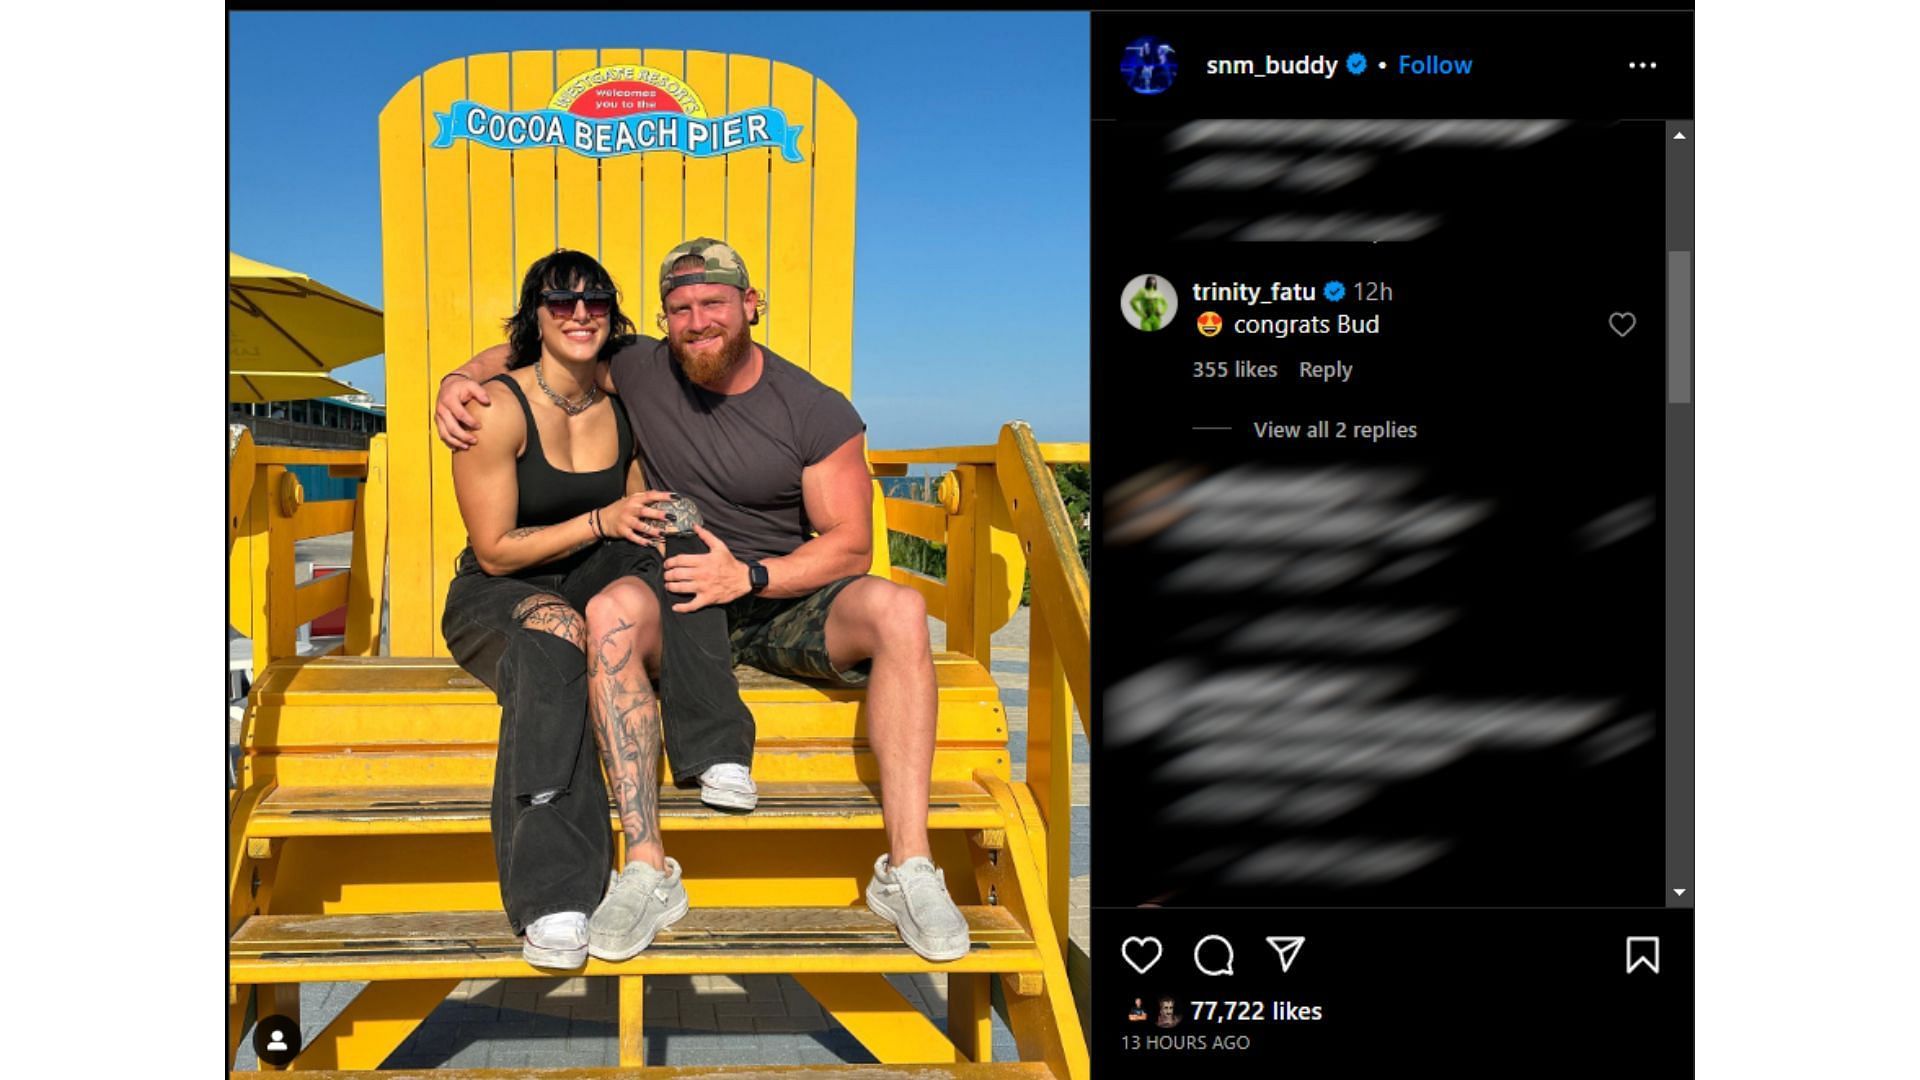 The newly-engaged couple has drawn a lot of attention online.